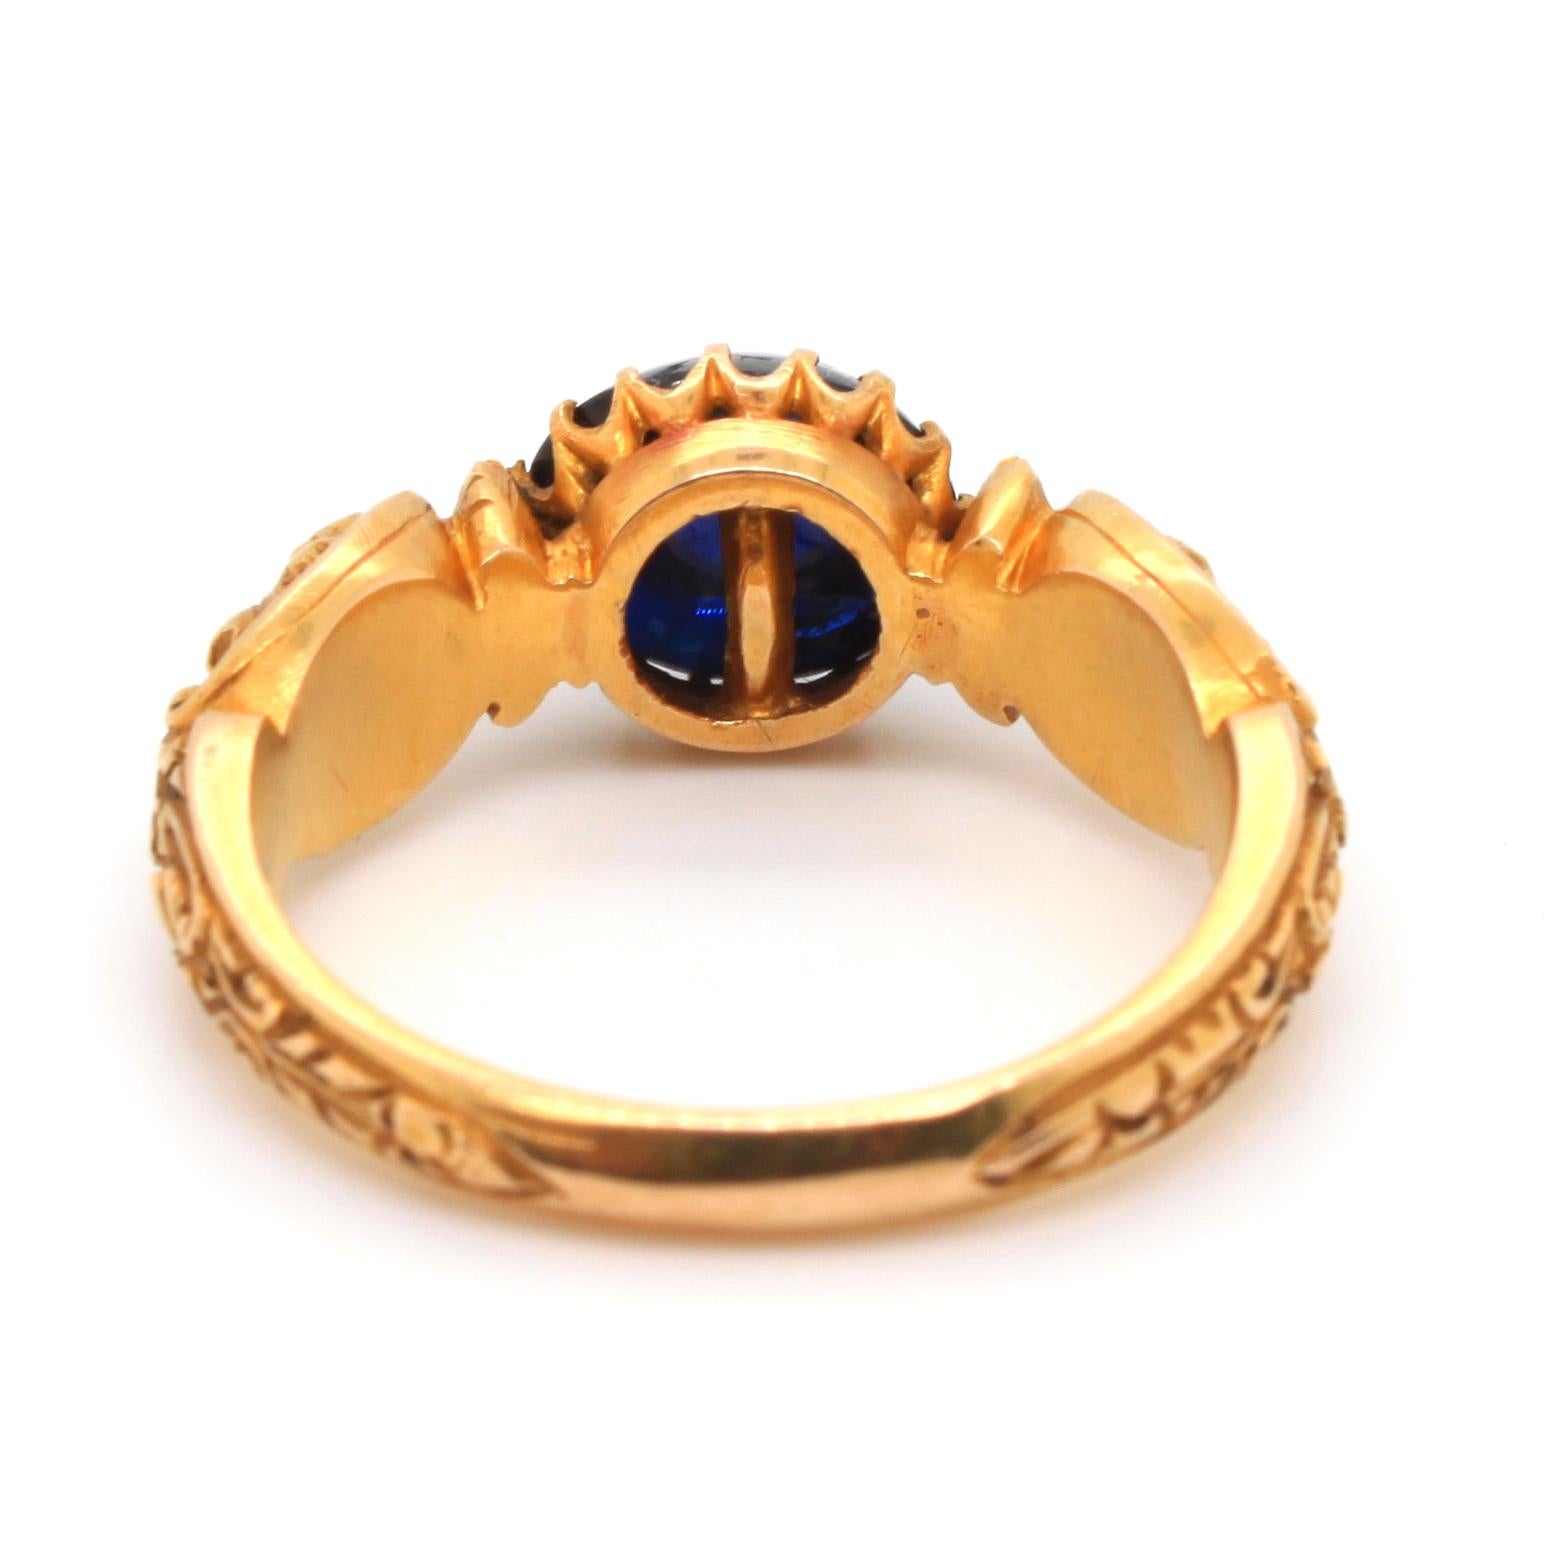 Renaissance Revival Sapphire and Gold Ring, circa 1840s 2